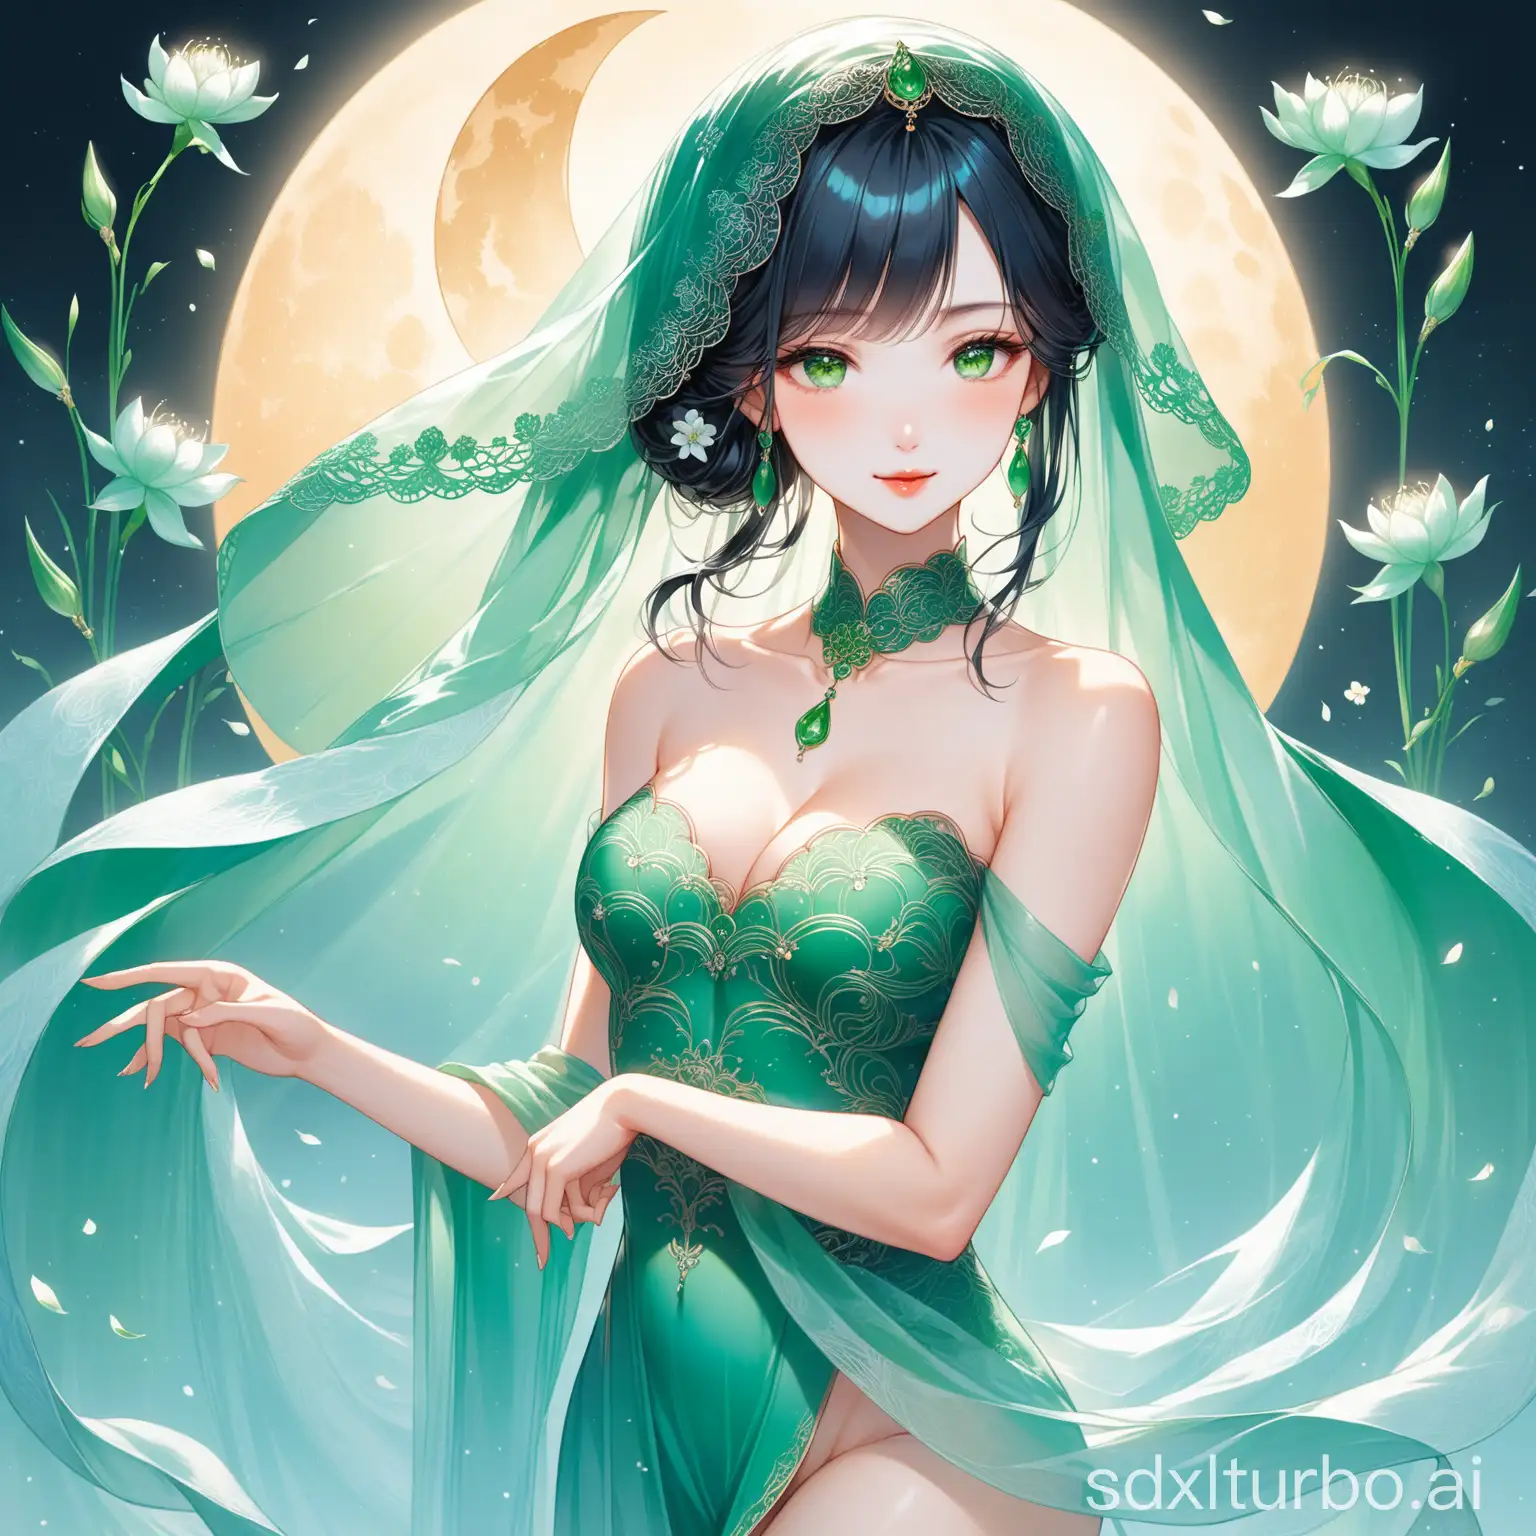 Light blue hair, jade-like skin, a face like blossoming flowers hiding the moon, slender and round thighs, a figure that's full in the front and curvy at the back, beautiful collarbones subtly showing, wearing thin blue veil, shoulders as if carved, waist as if binding silver, muscles as if jade, graceful steps, pale wrists appearing from behind light gauze curtains with eyes reflecting clear waves, a small bun on the head with an empty golden hairpin adorned with purple gems, lace scattered on the blue-black hair like a blossoming flower, fingers as if slicing green onions, lips as if holding red dan, a smile that touches one's soul